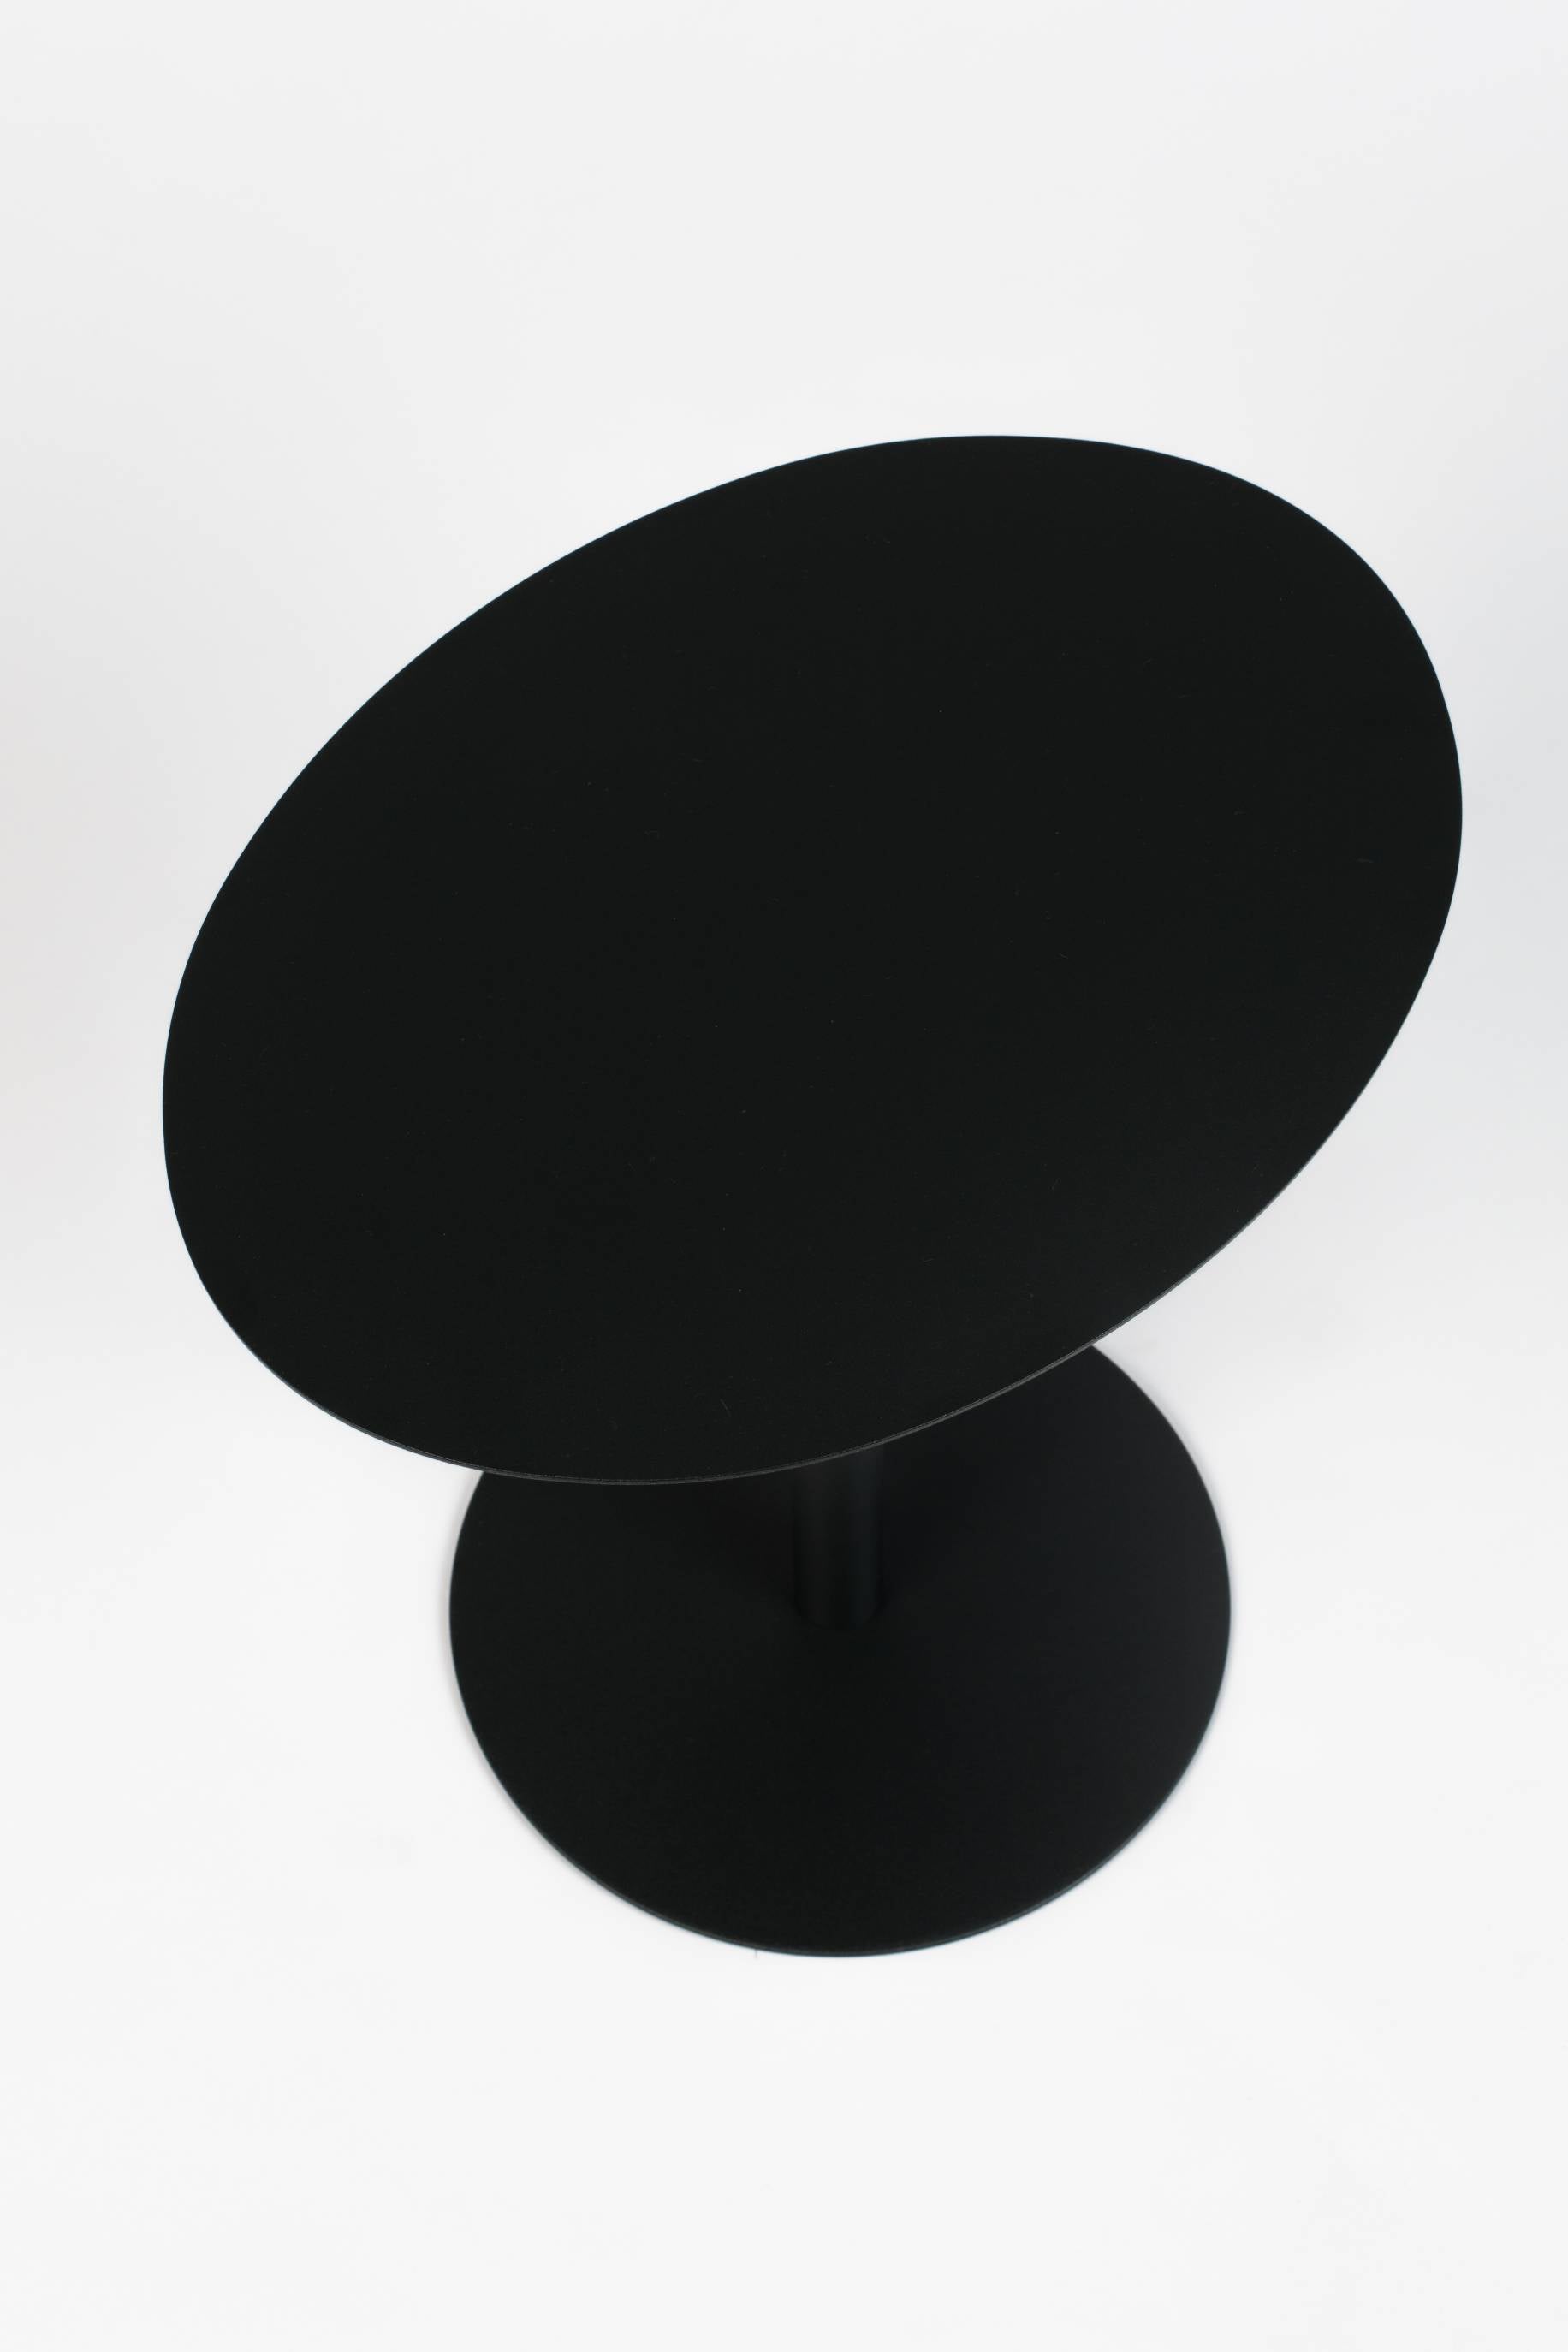 Zuiver | SIDE TABLE SNOW BLACK OVAL Default Title